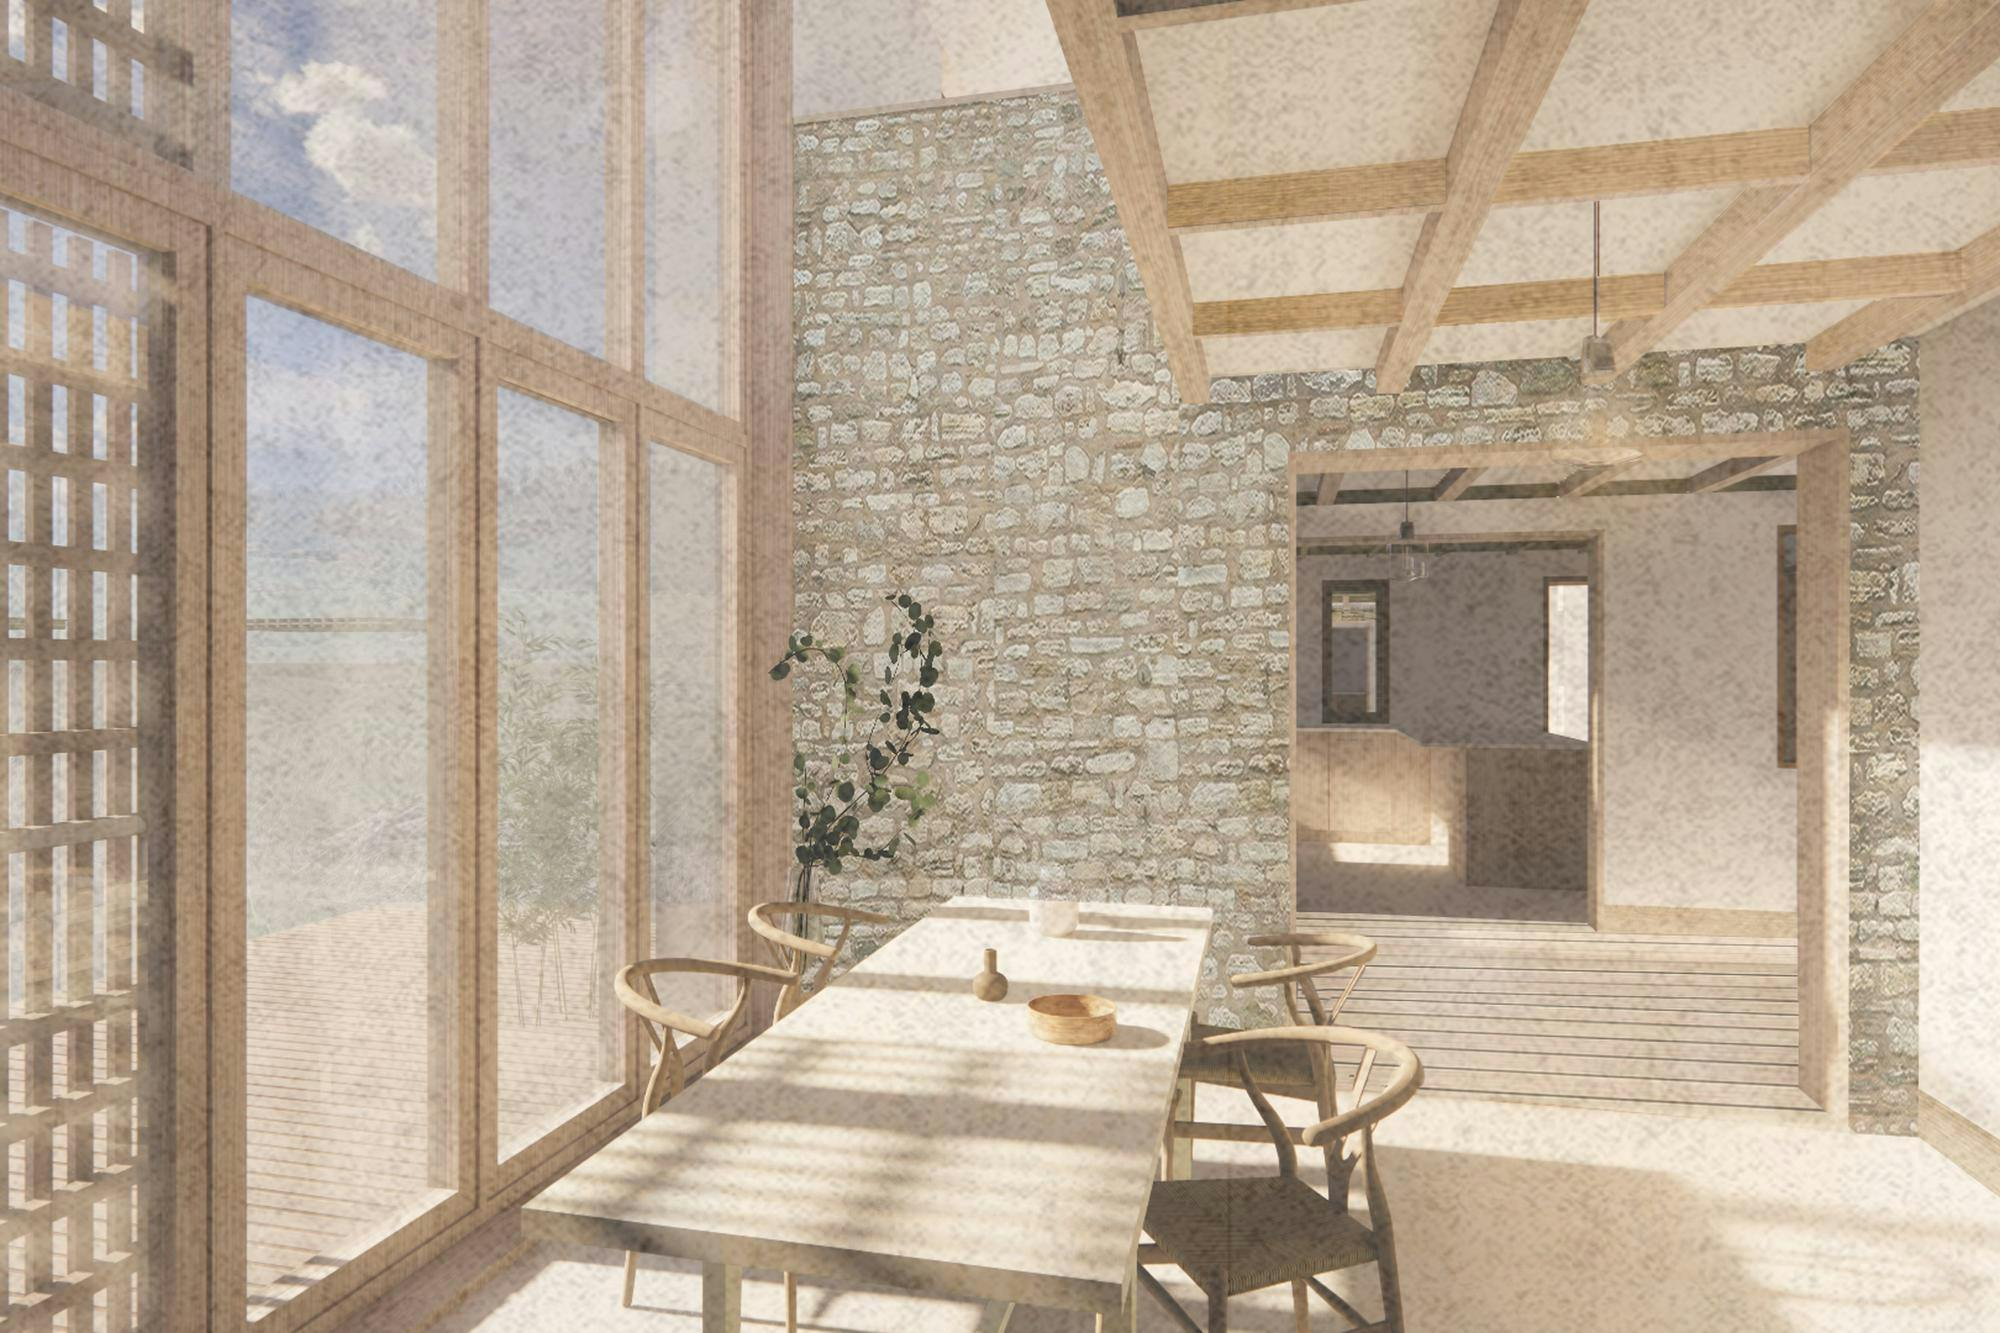 Architectural visualisation of interior dining room in the Shropshire Farm